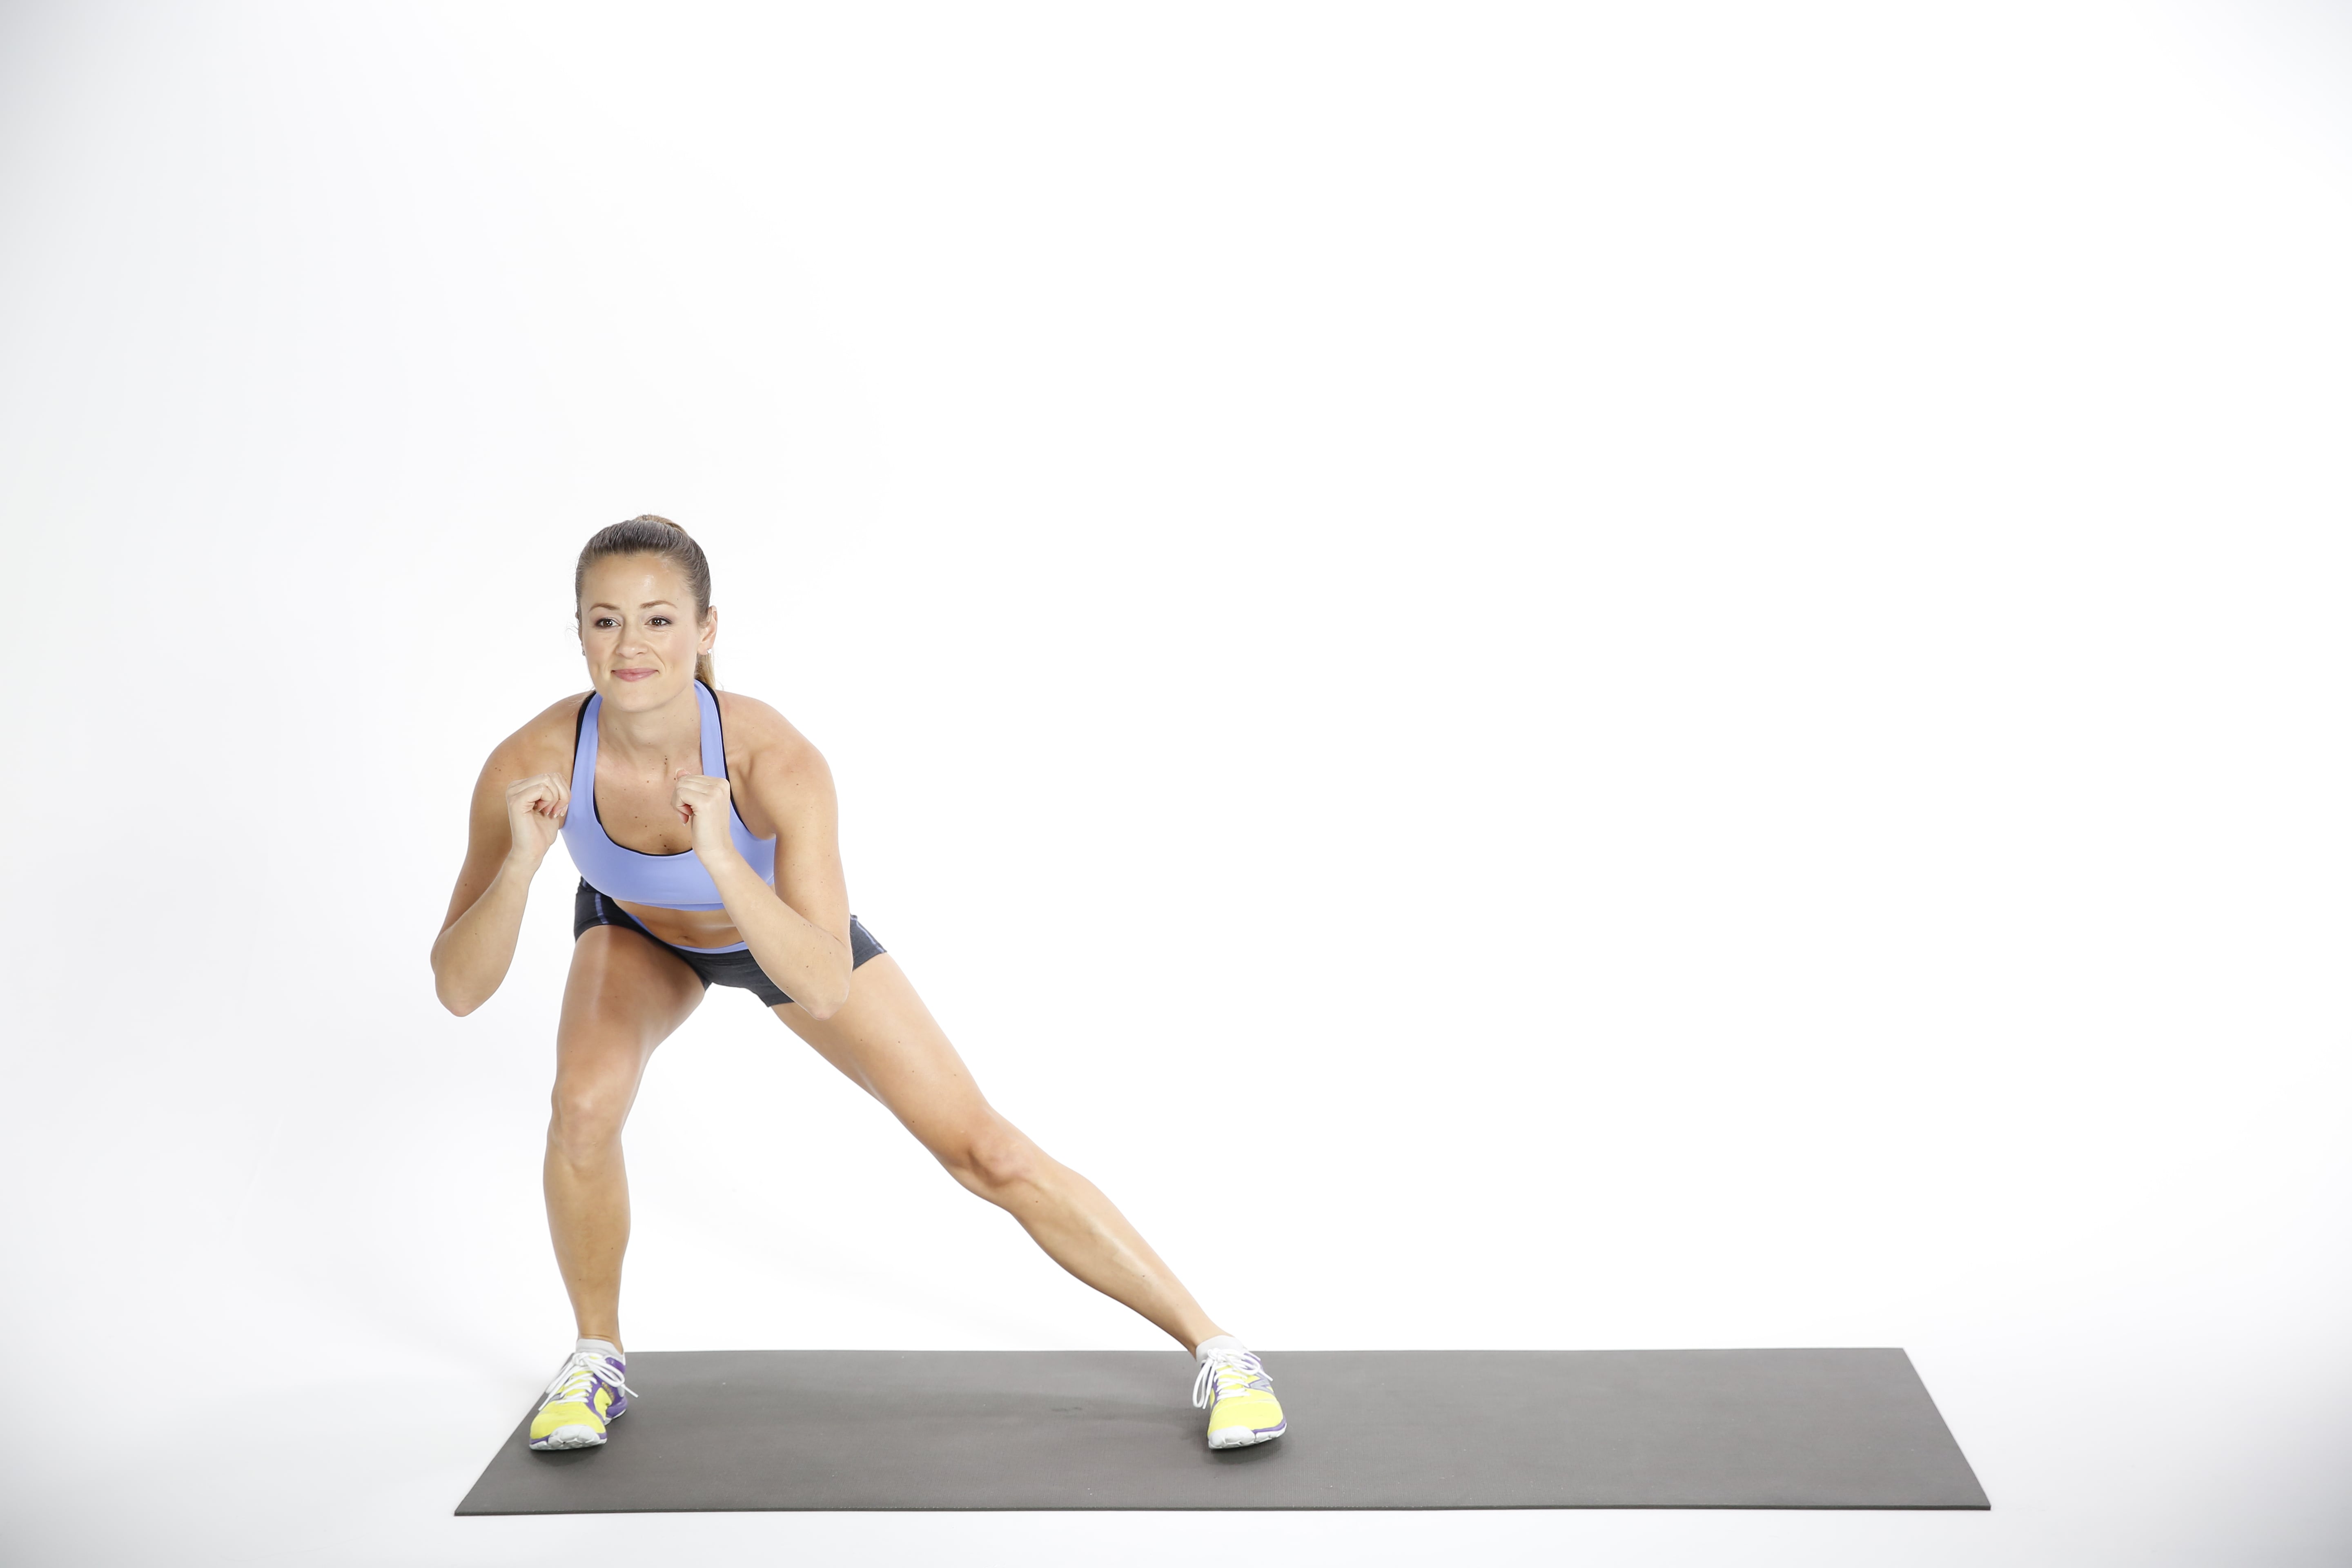 3 Jumping Jack Alternatives That Are Way Easier On Your Knees